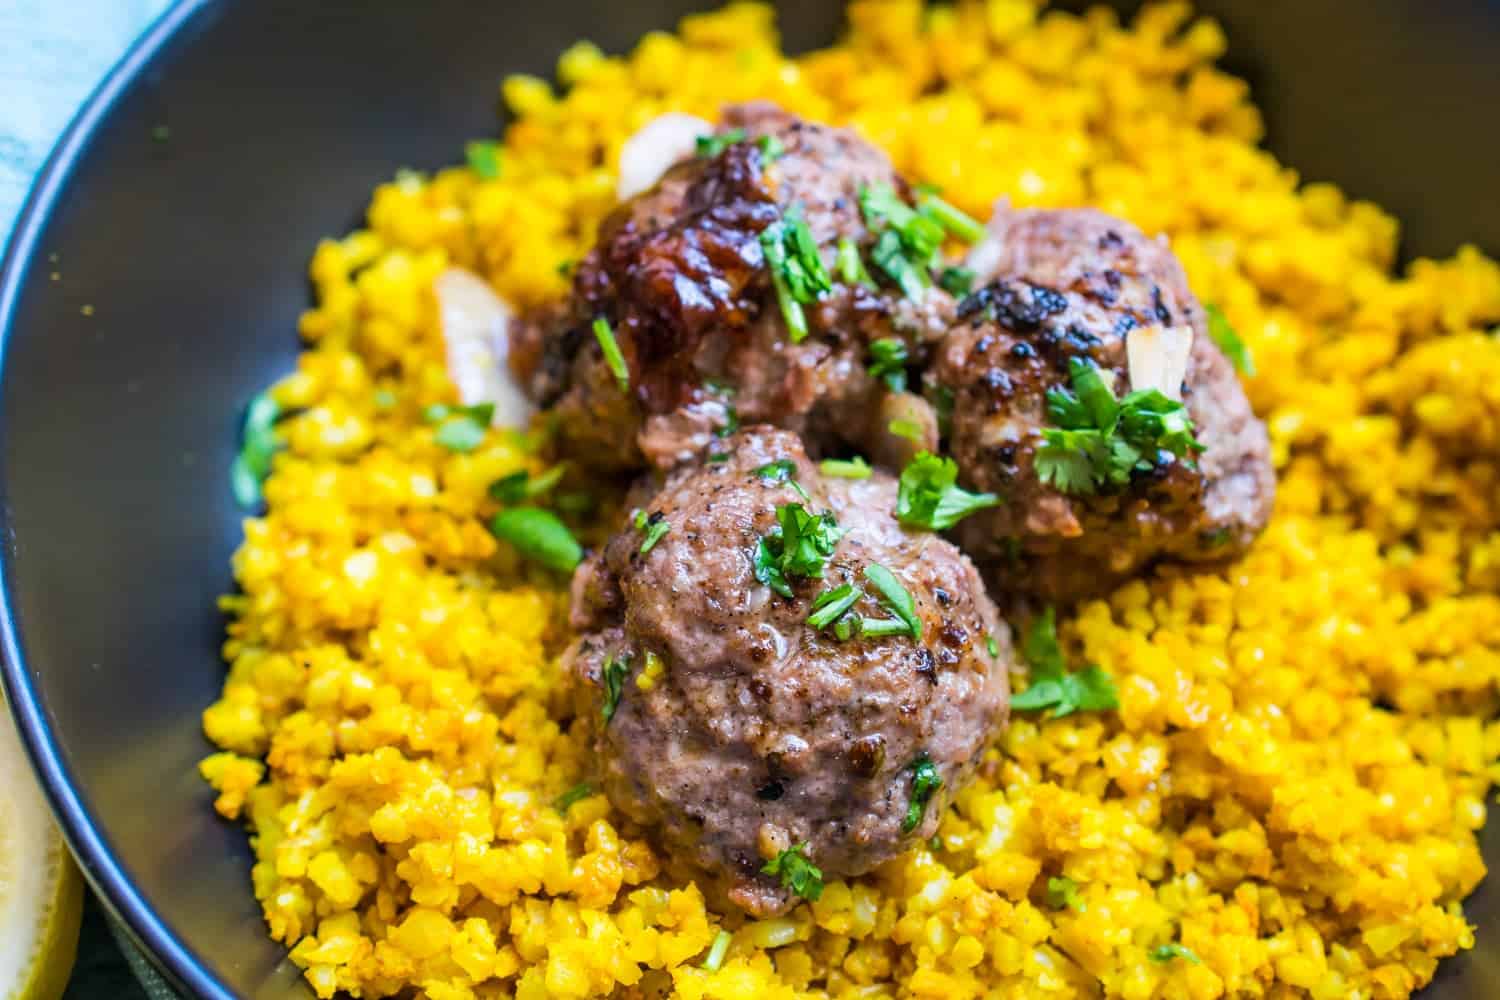 three carne asada meatballs over yellow rice in a black bowl. garnished with cilantro